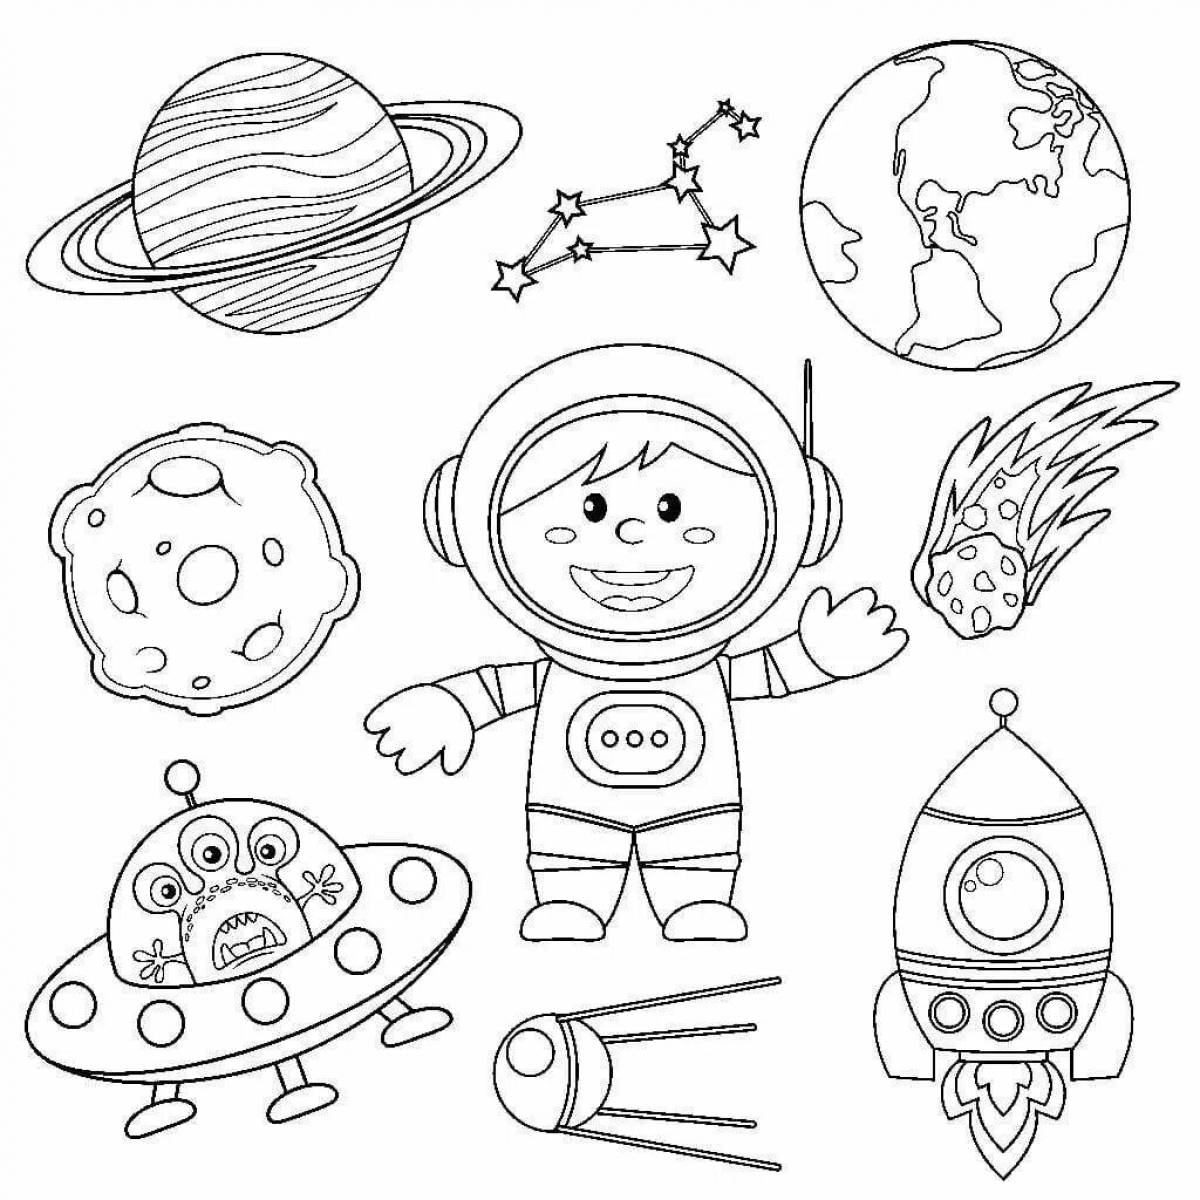 Fascinating space coloring game